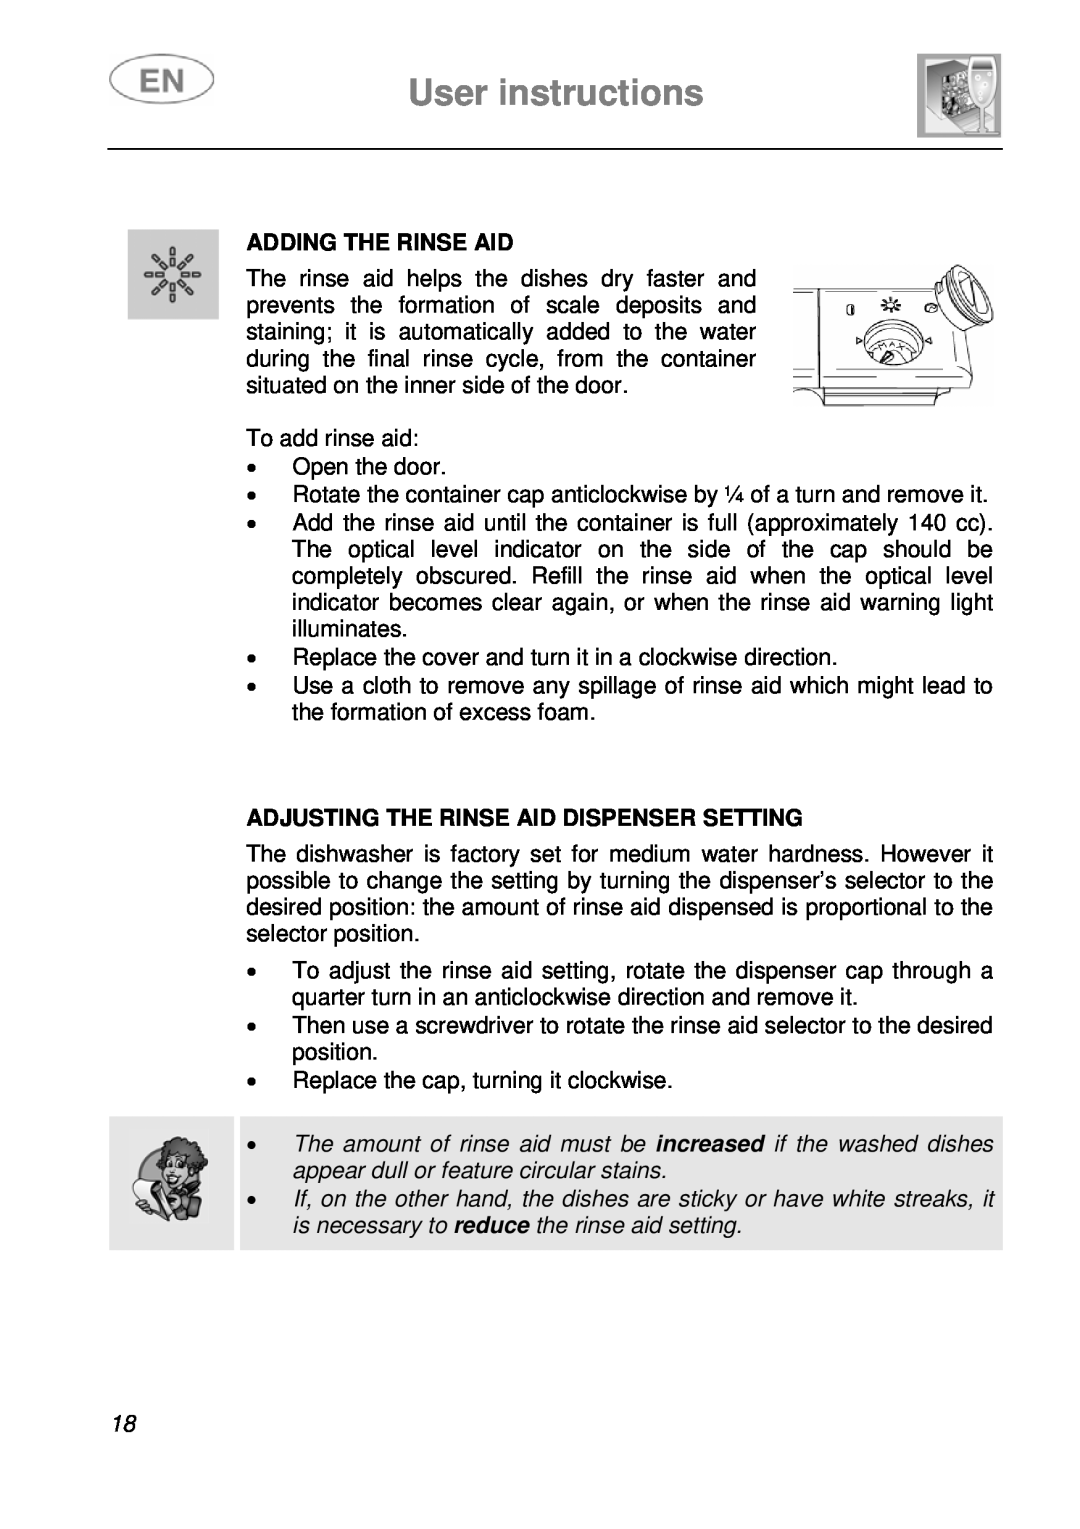 Smeg STA6249, STA6248 instruction manual User instructions, Adding The Rinse Aid, Adjusting The Rinse Aid Dispenser Setting 